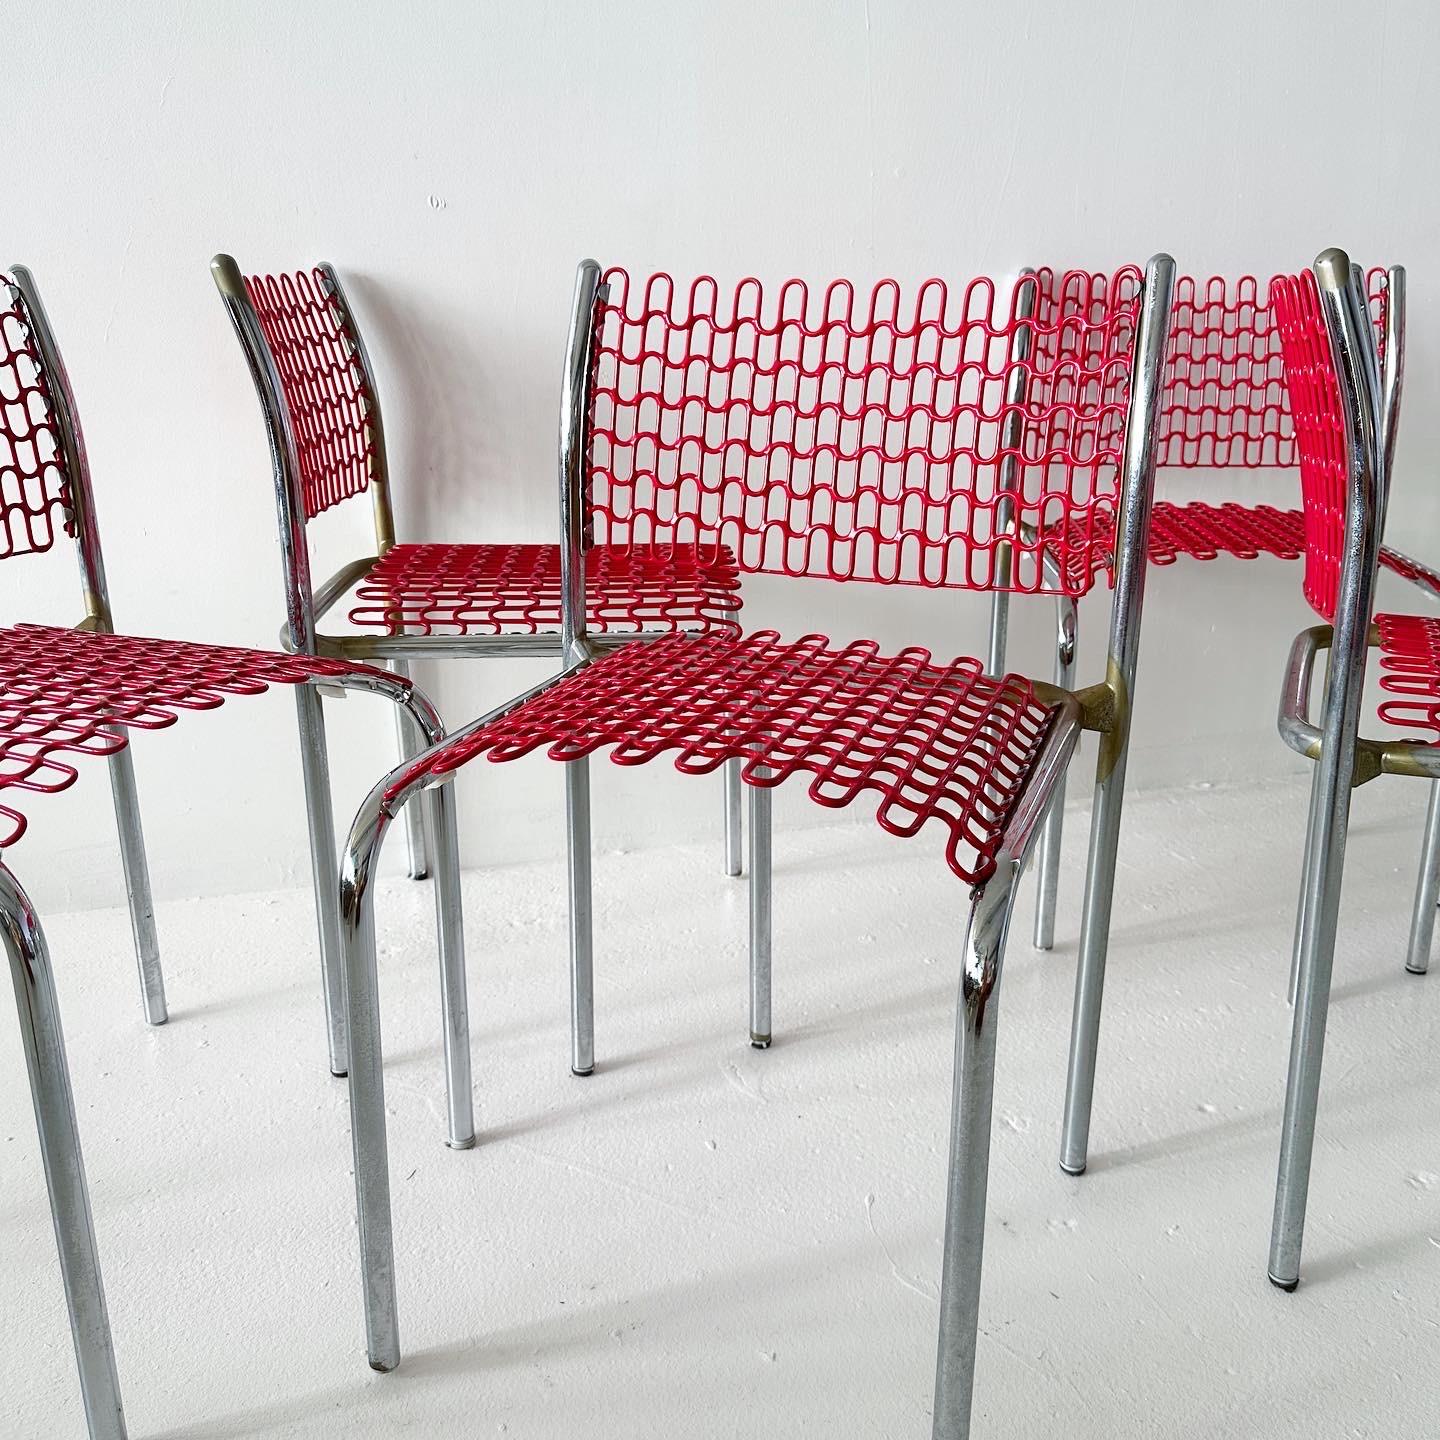 Post-Modern Red Sof Tech Chairs by David Rowland for Thonet (set of 4) (8 available) For Sale